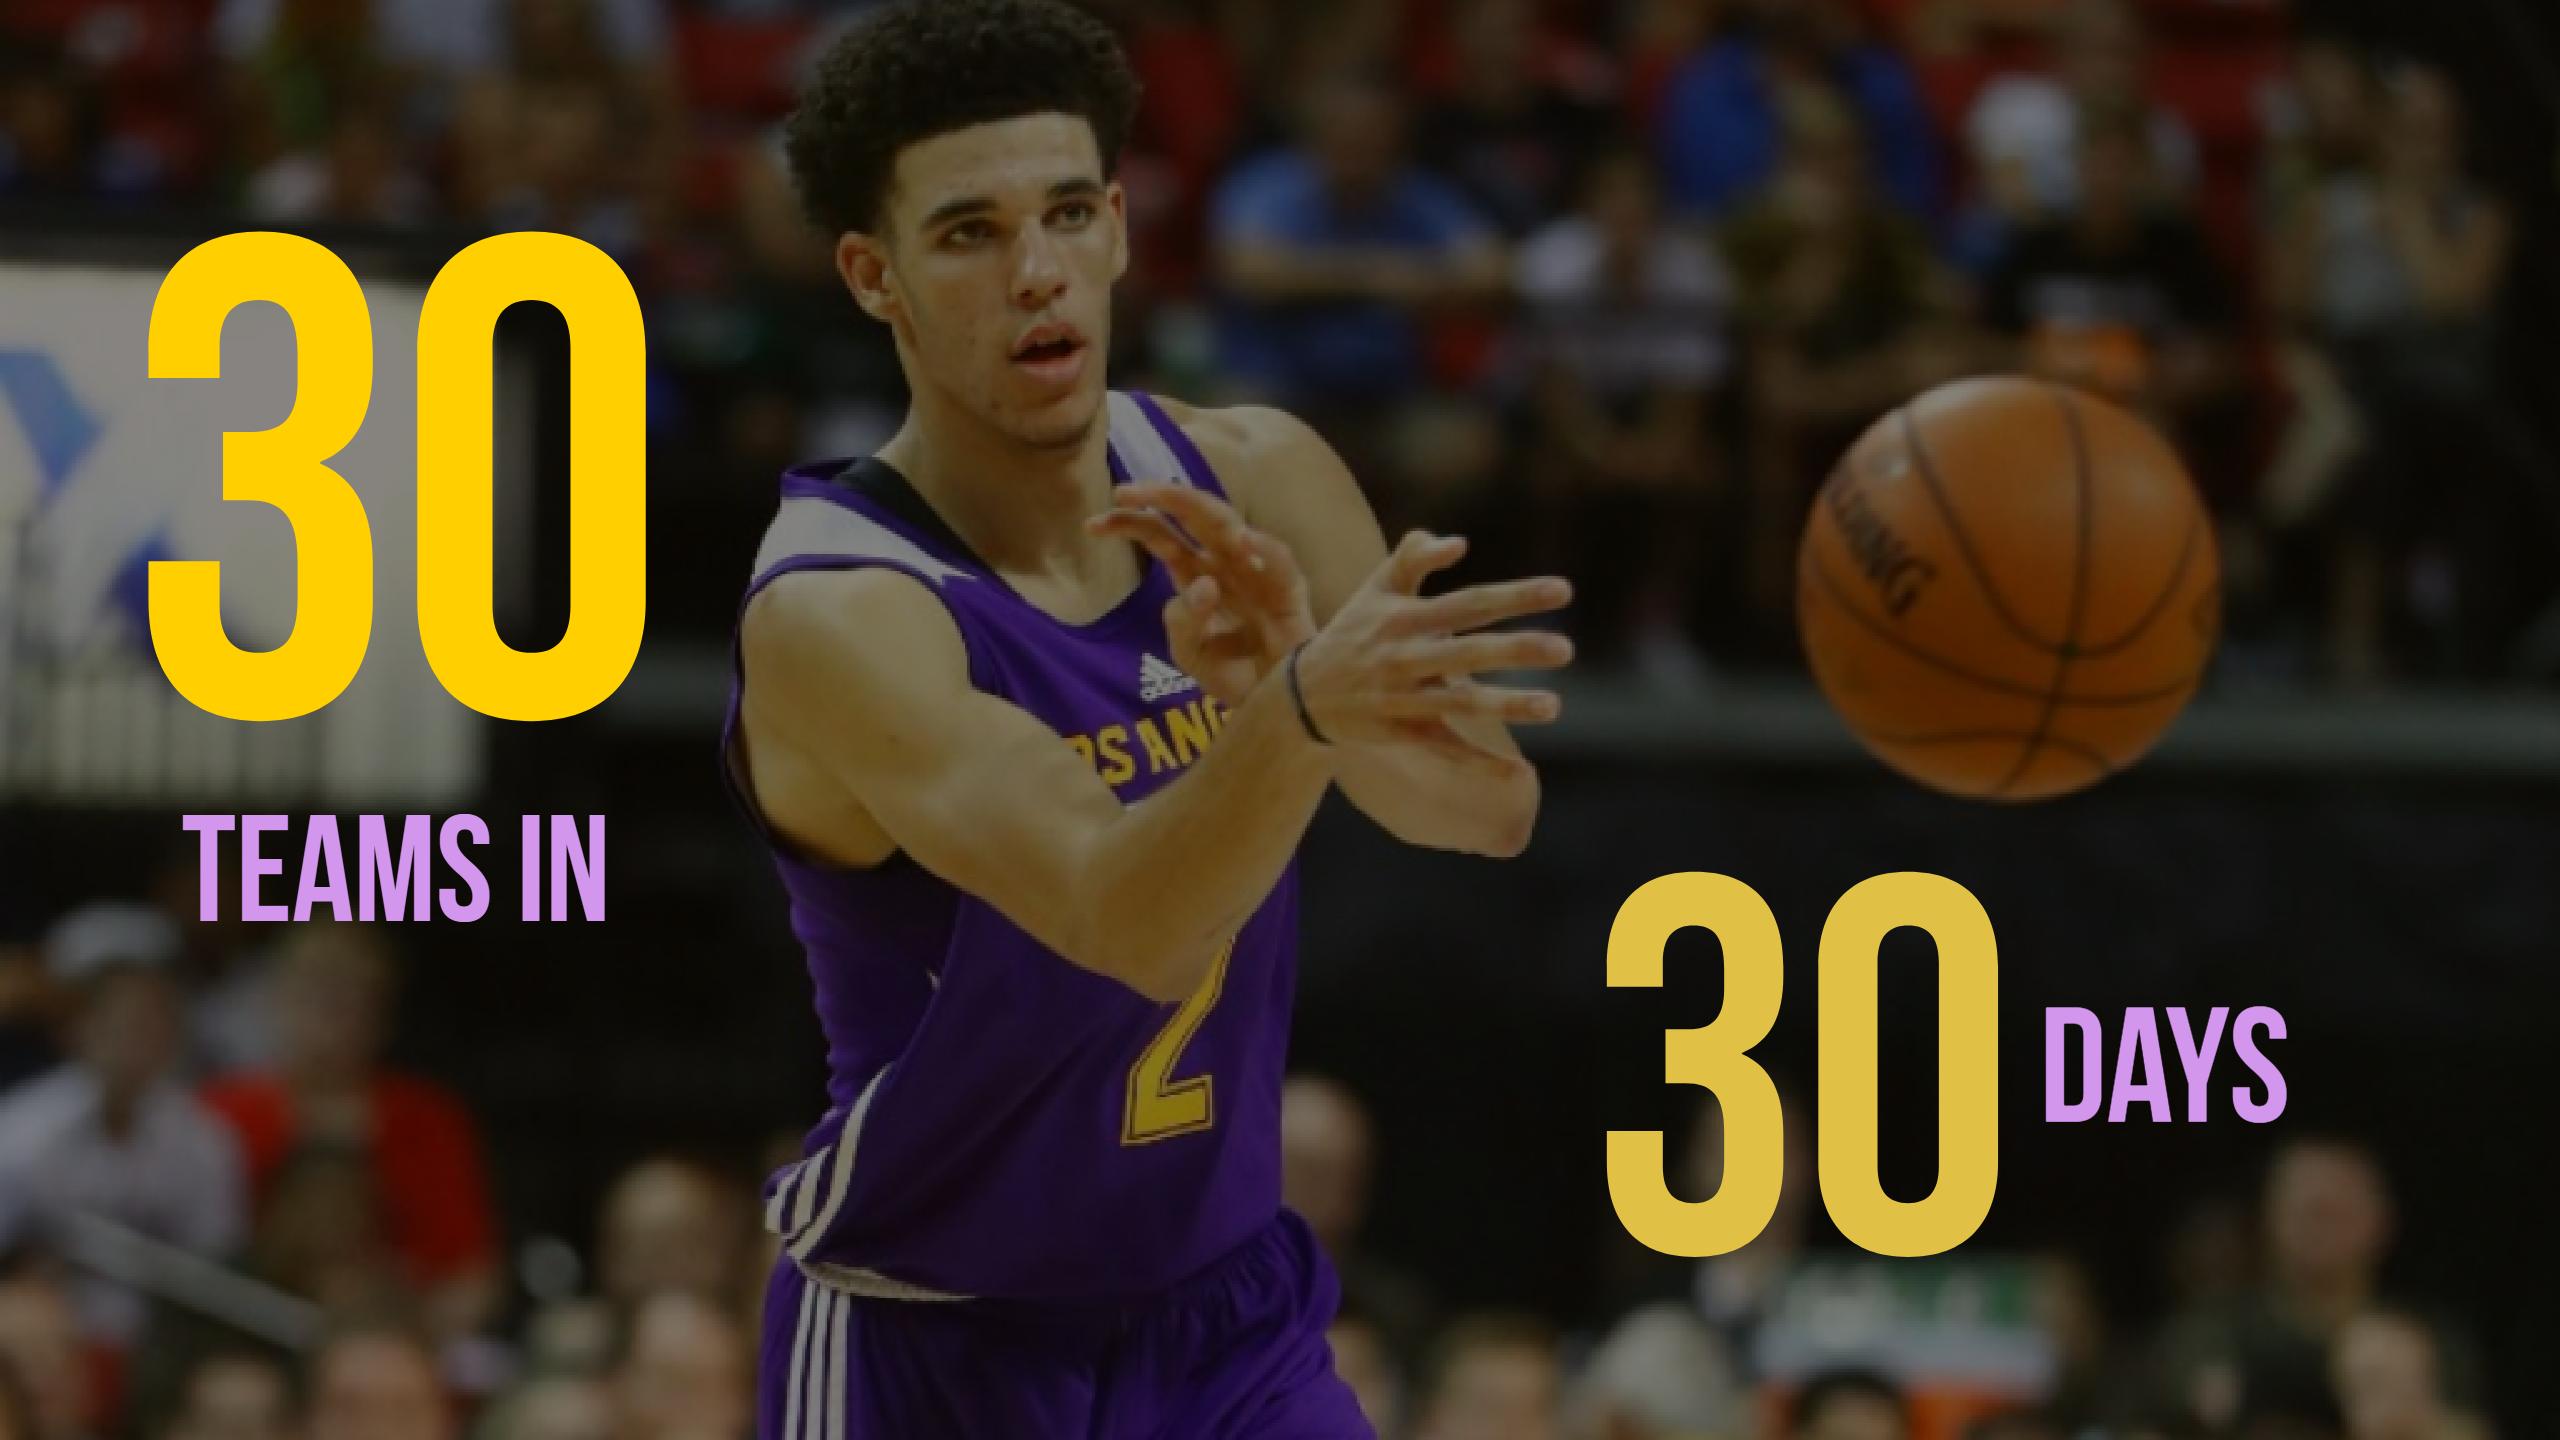 teams in 30 days: All eyes on Lonzo Ball.- and 2018 free agents